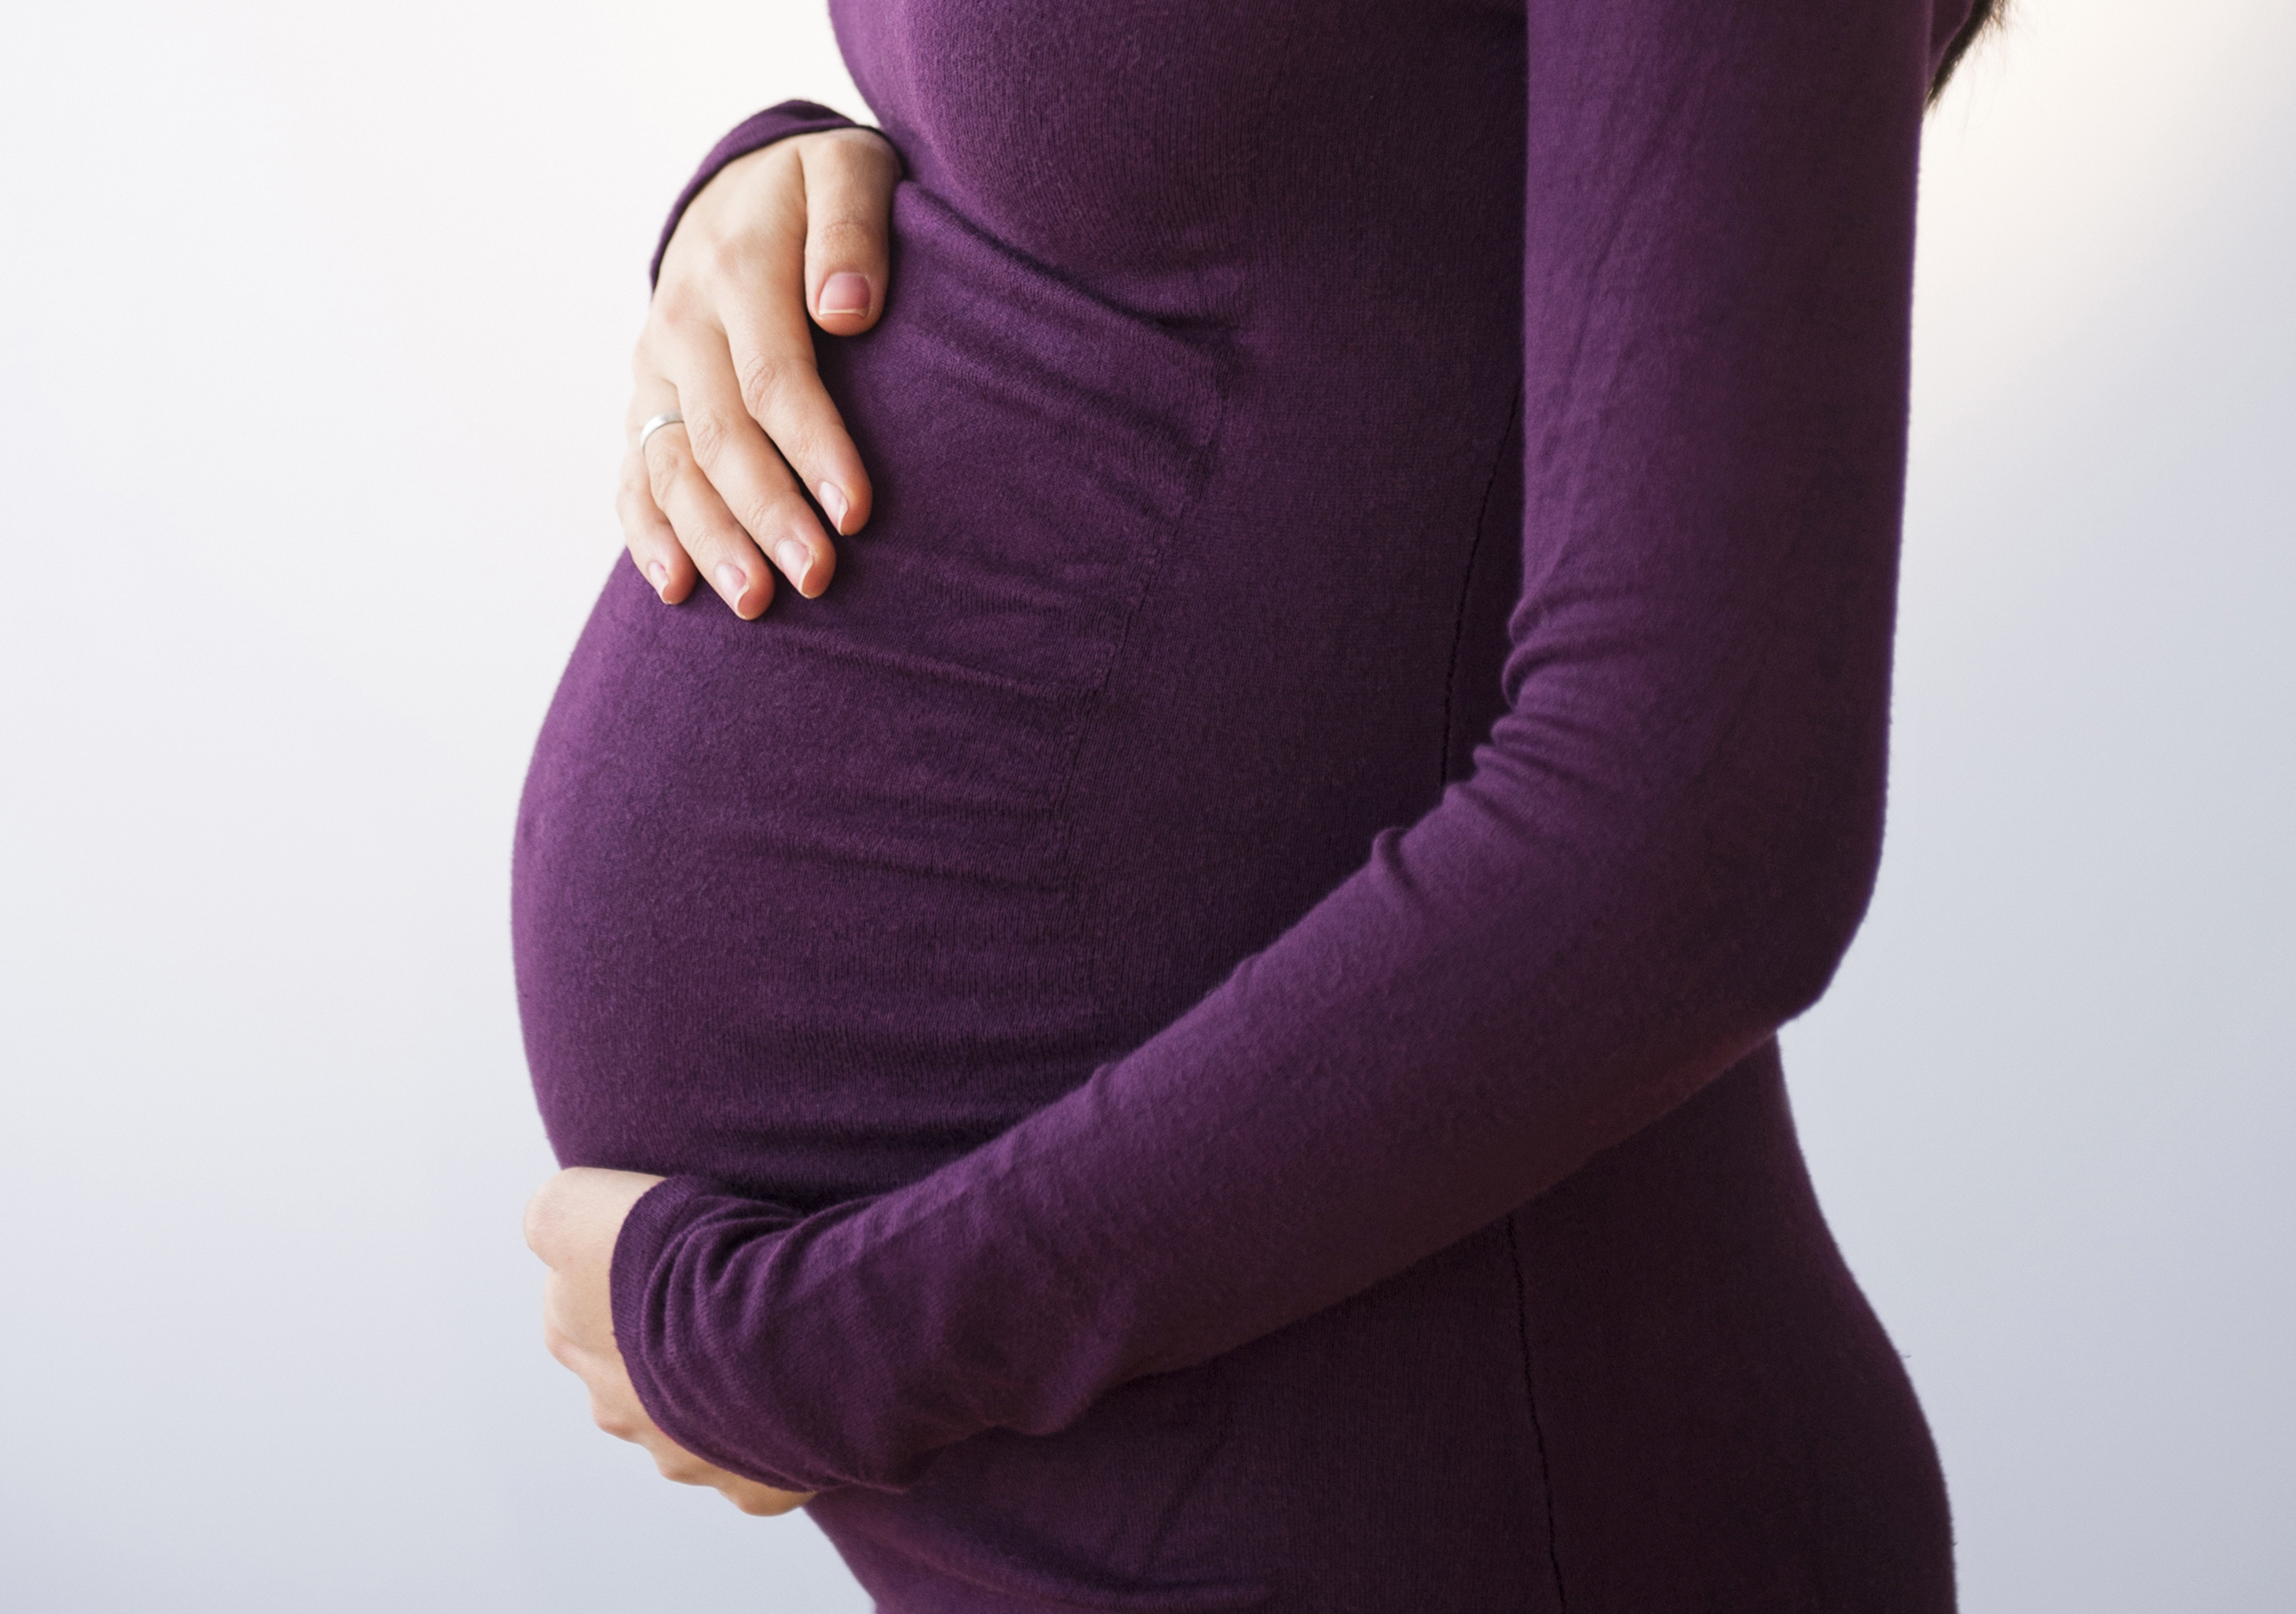 Pregnant Caucasian woman holding stomach